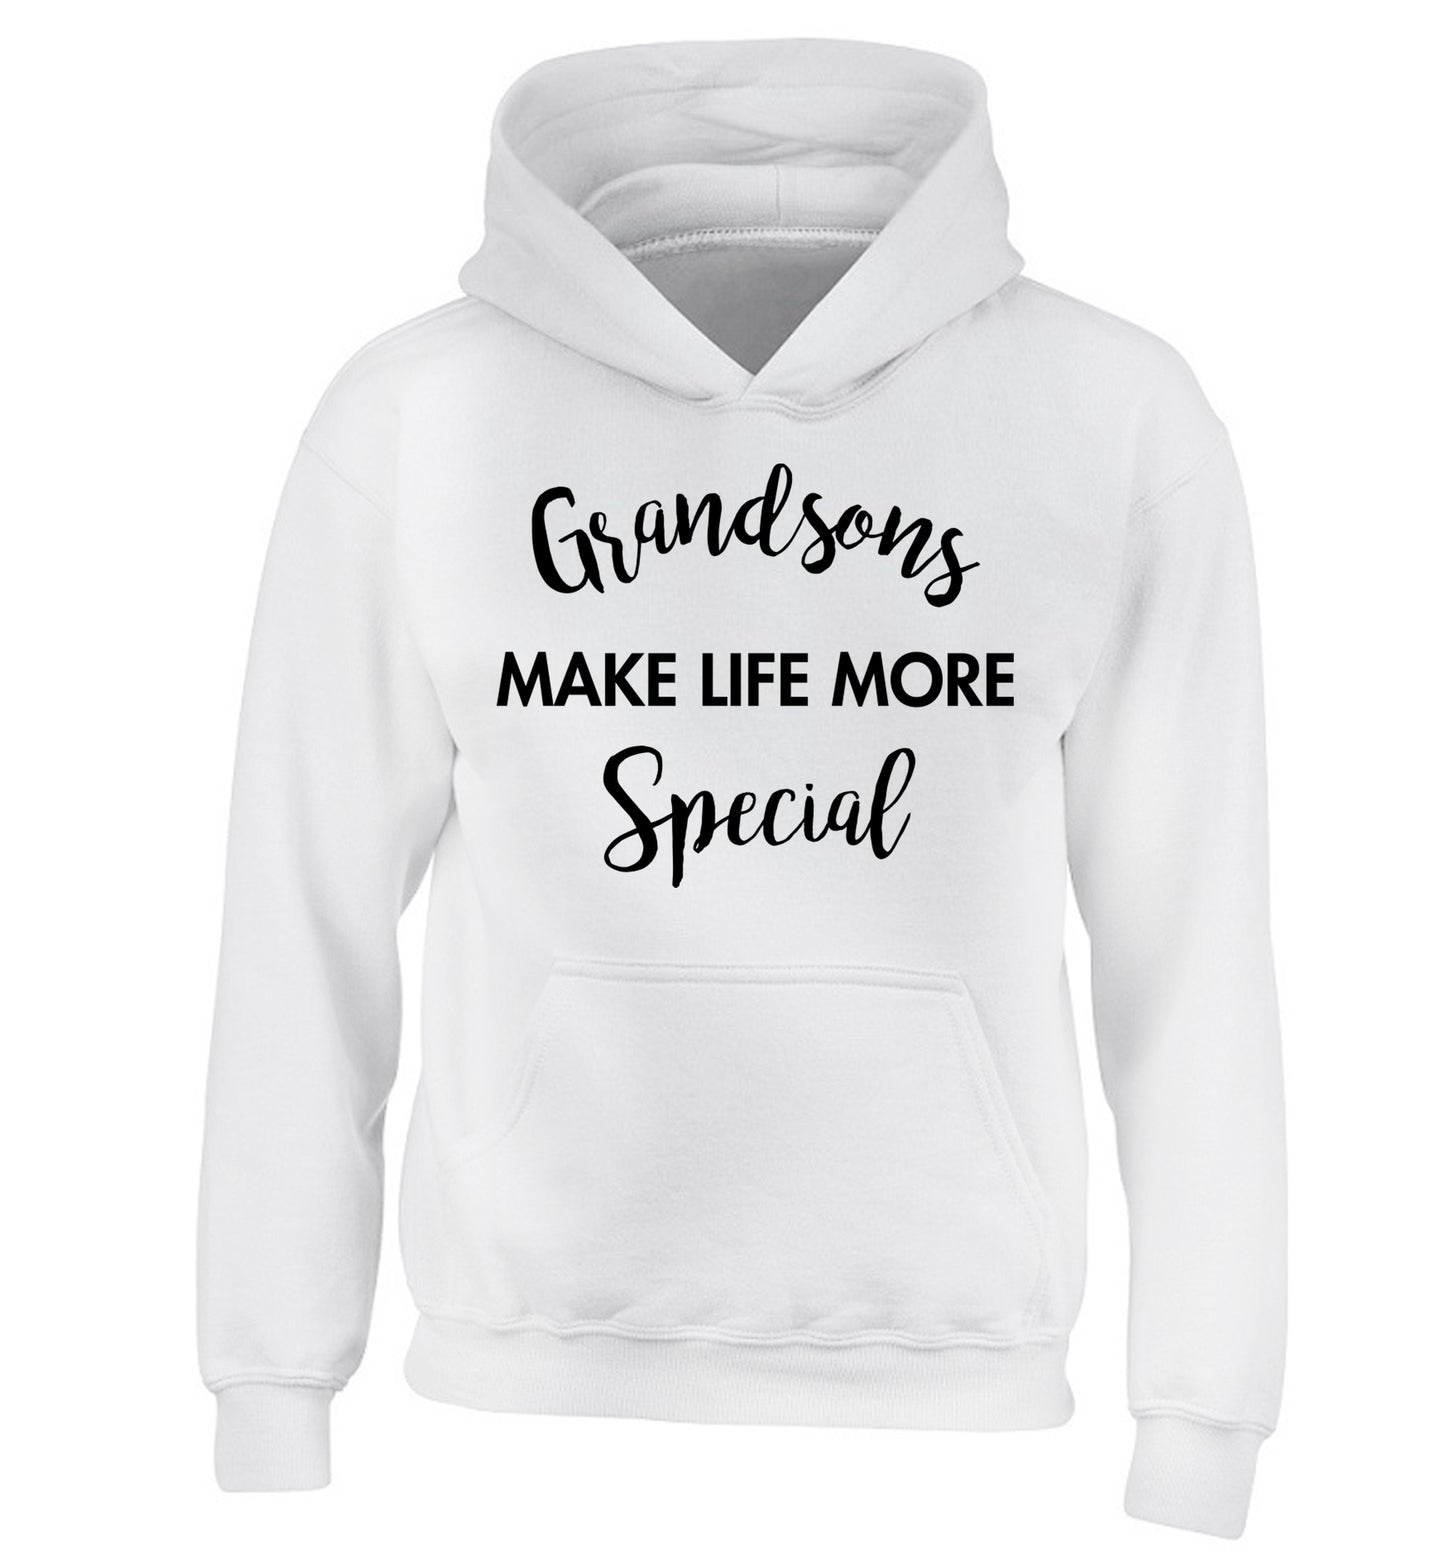 Grandsons make life more special children's white hoodie 12-14 Years